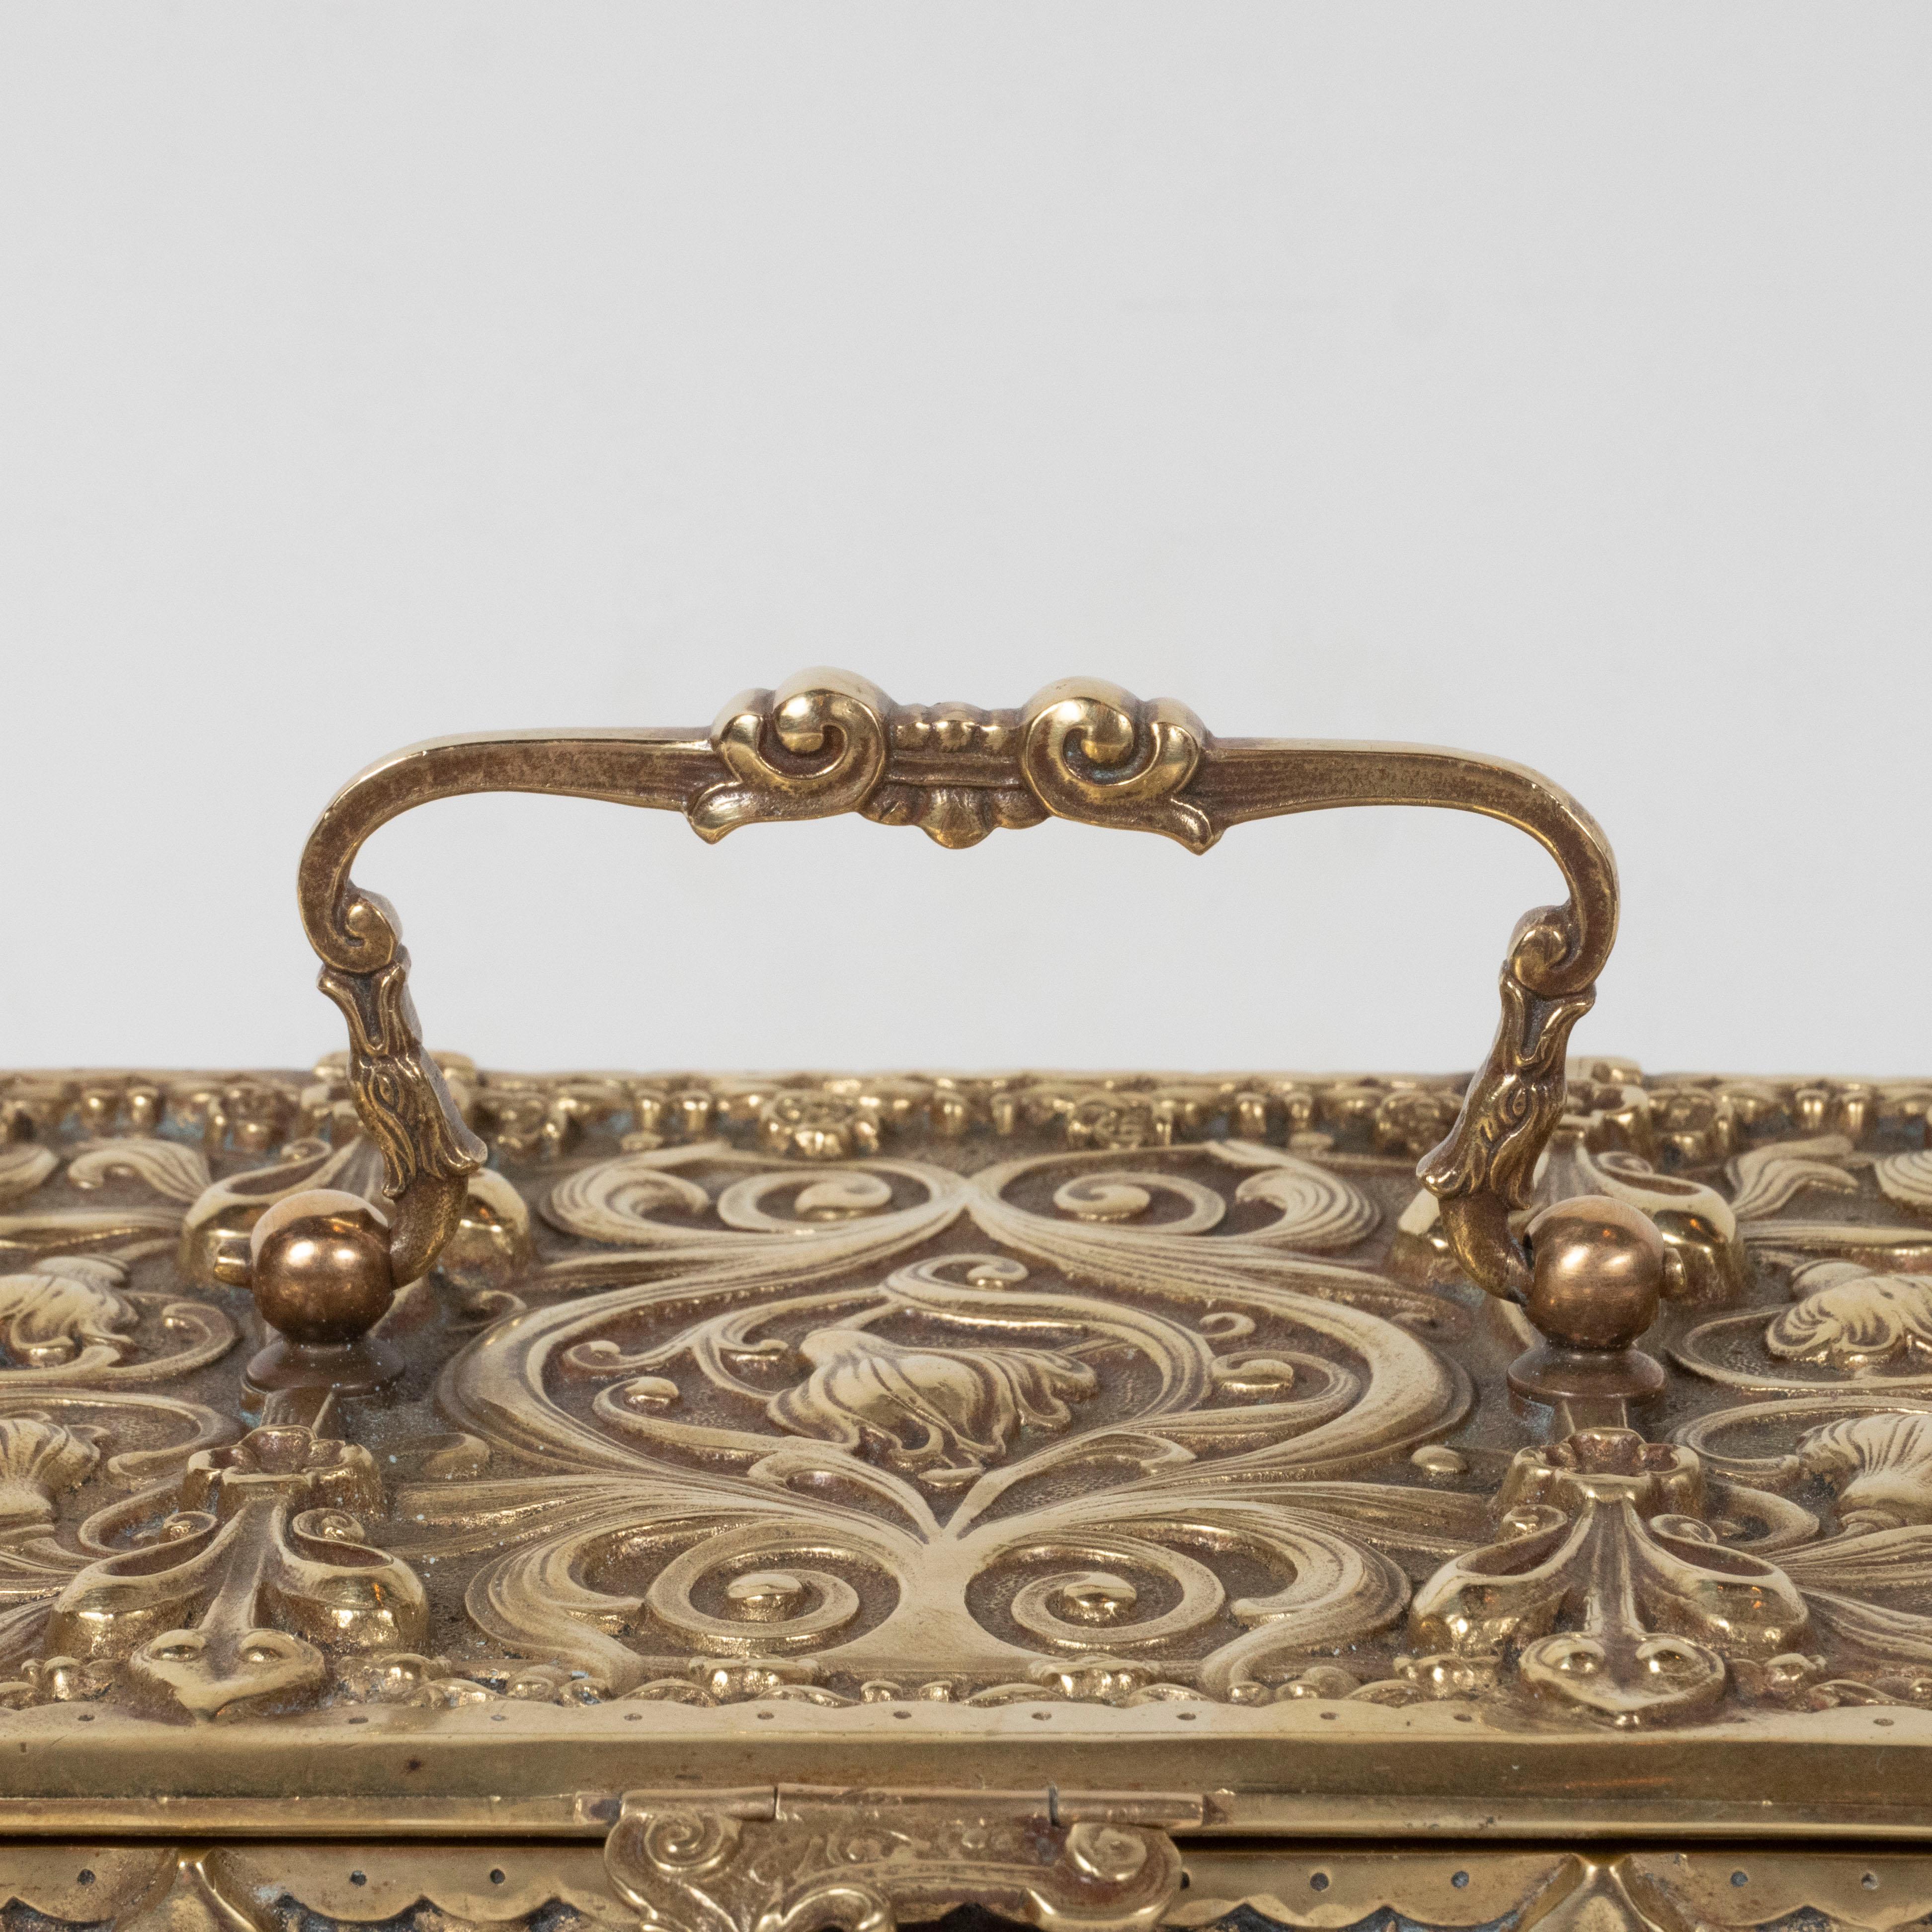 This elegant Art Nouveau box was realized in the United States, circa 1900. It features a volumetric rectangular body with stylized fleur-de-lis, foliate and foliate motifs suggesting day lilies. The piece boasts neoclassical repoussé designs etched